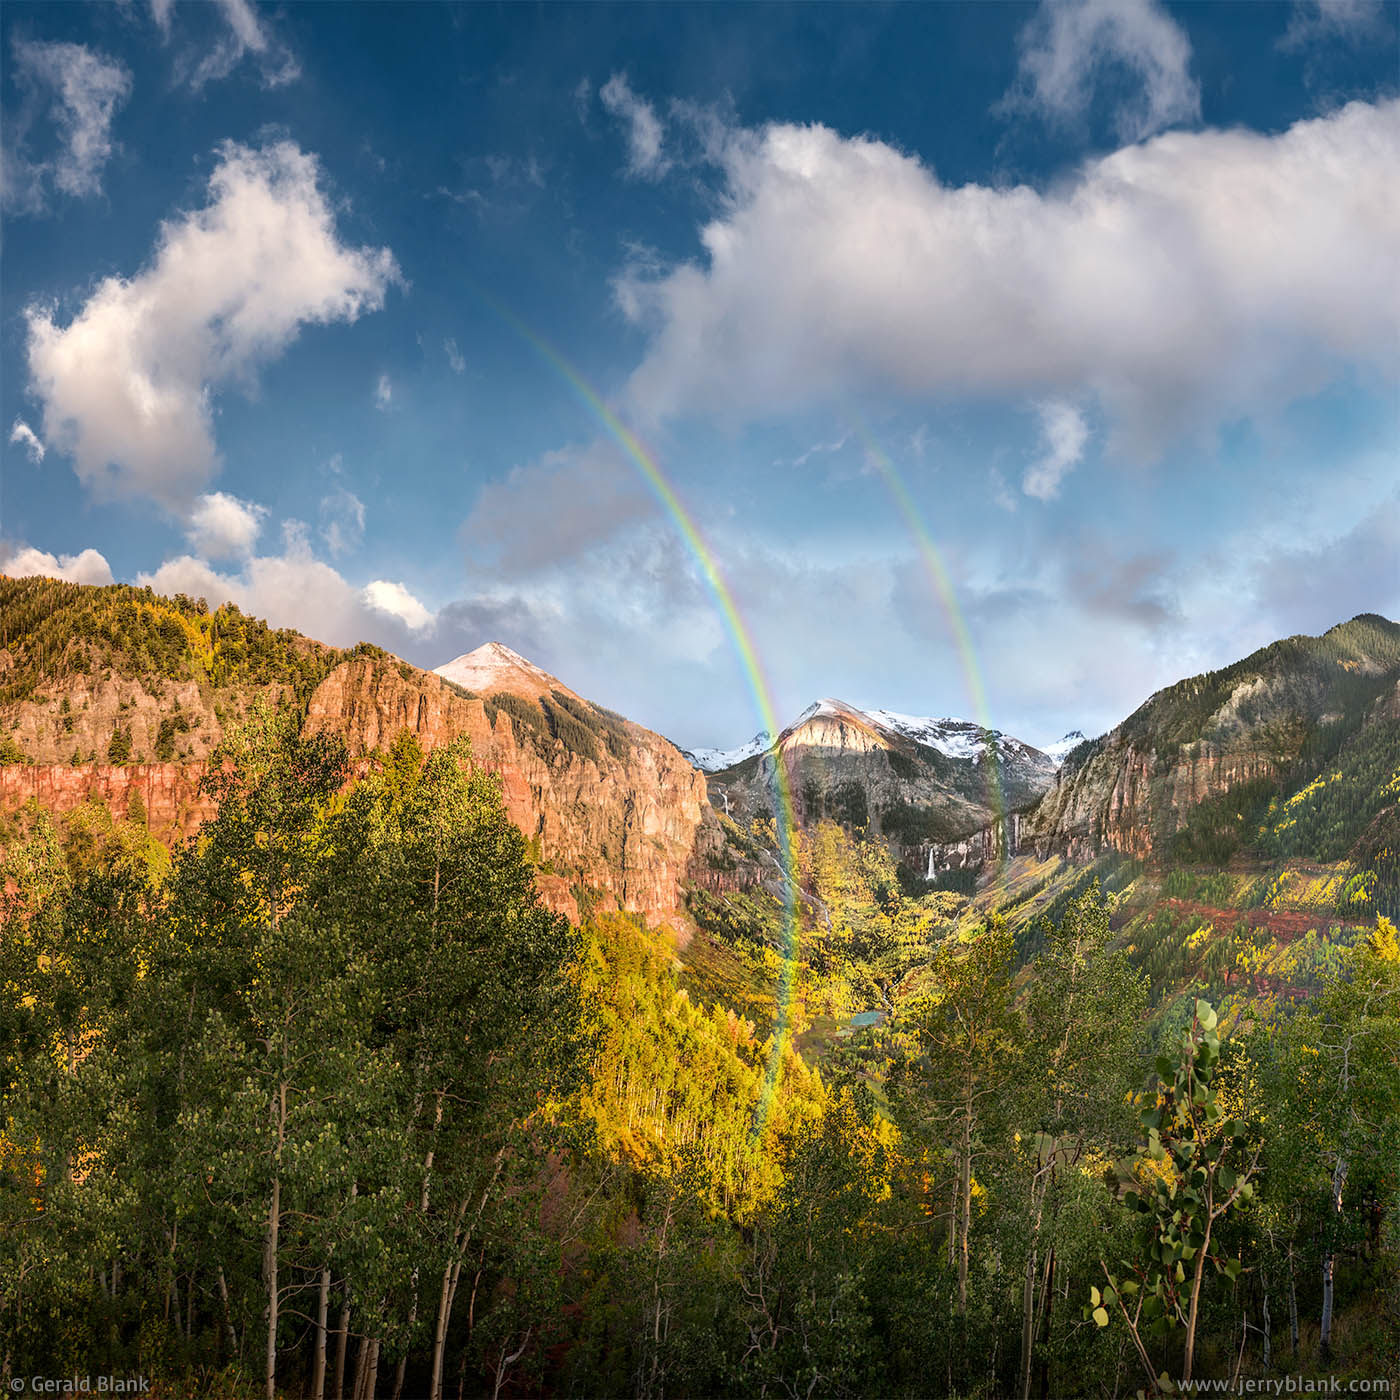 #49450 - A late evening double rainbow lights up the San Miguel canyon east of Telluride, Colorado. Ajax Peak, Ingram Falls, Ingram Peak, and Bridal Veil Falls are visible in the distance. Photo by Jerry Blank.